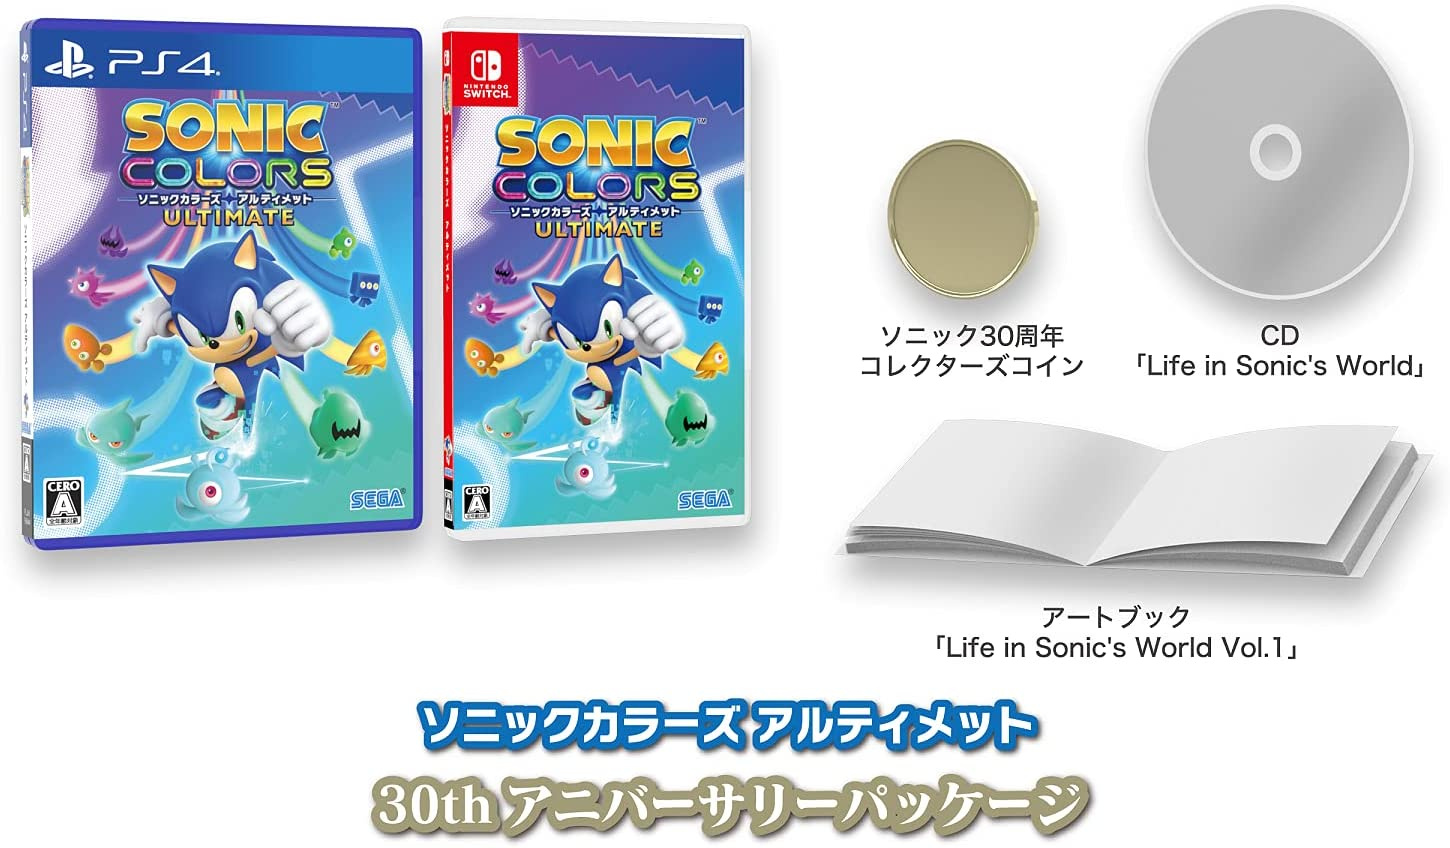 Sonic Colors: Ultimate and the Birthday Pack